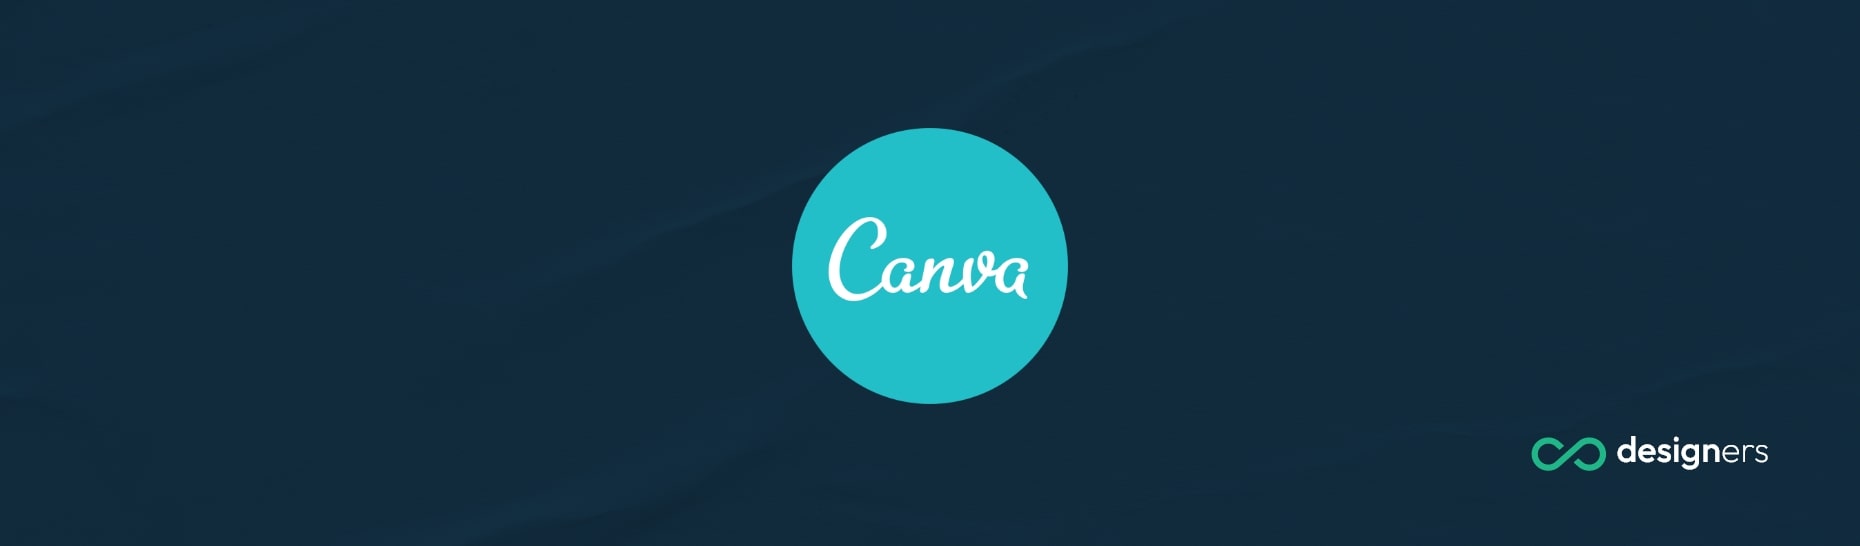 Does Canva Charge Shipping?